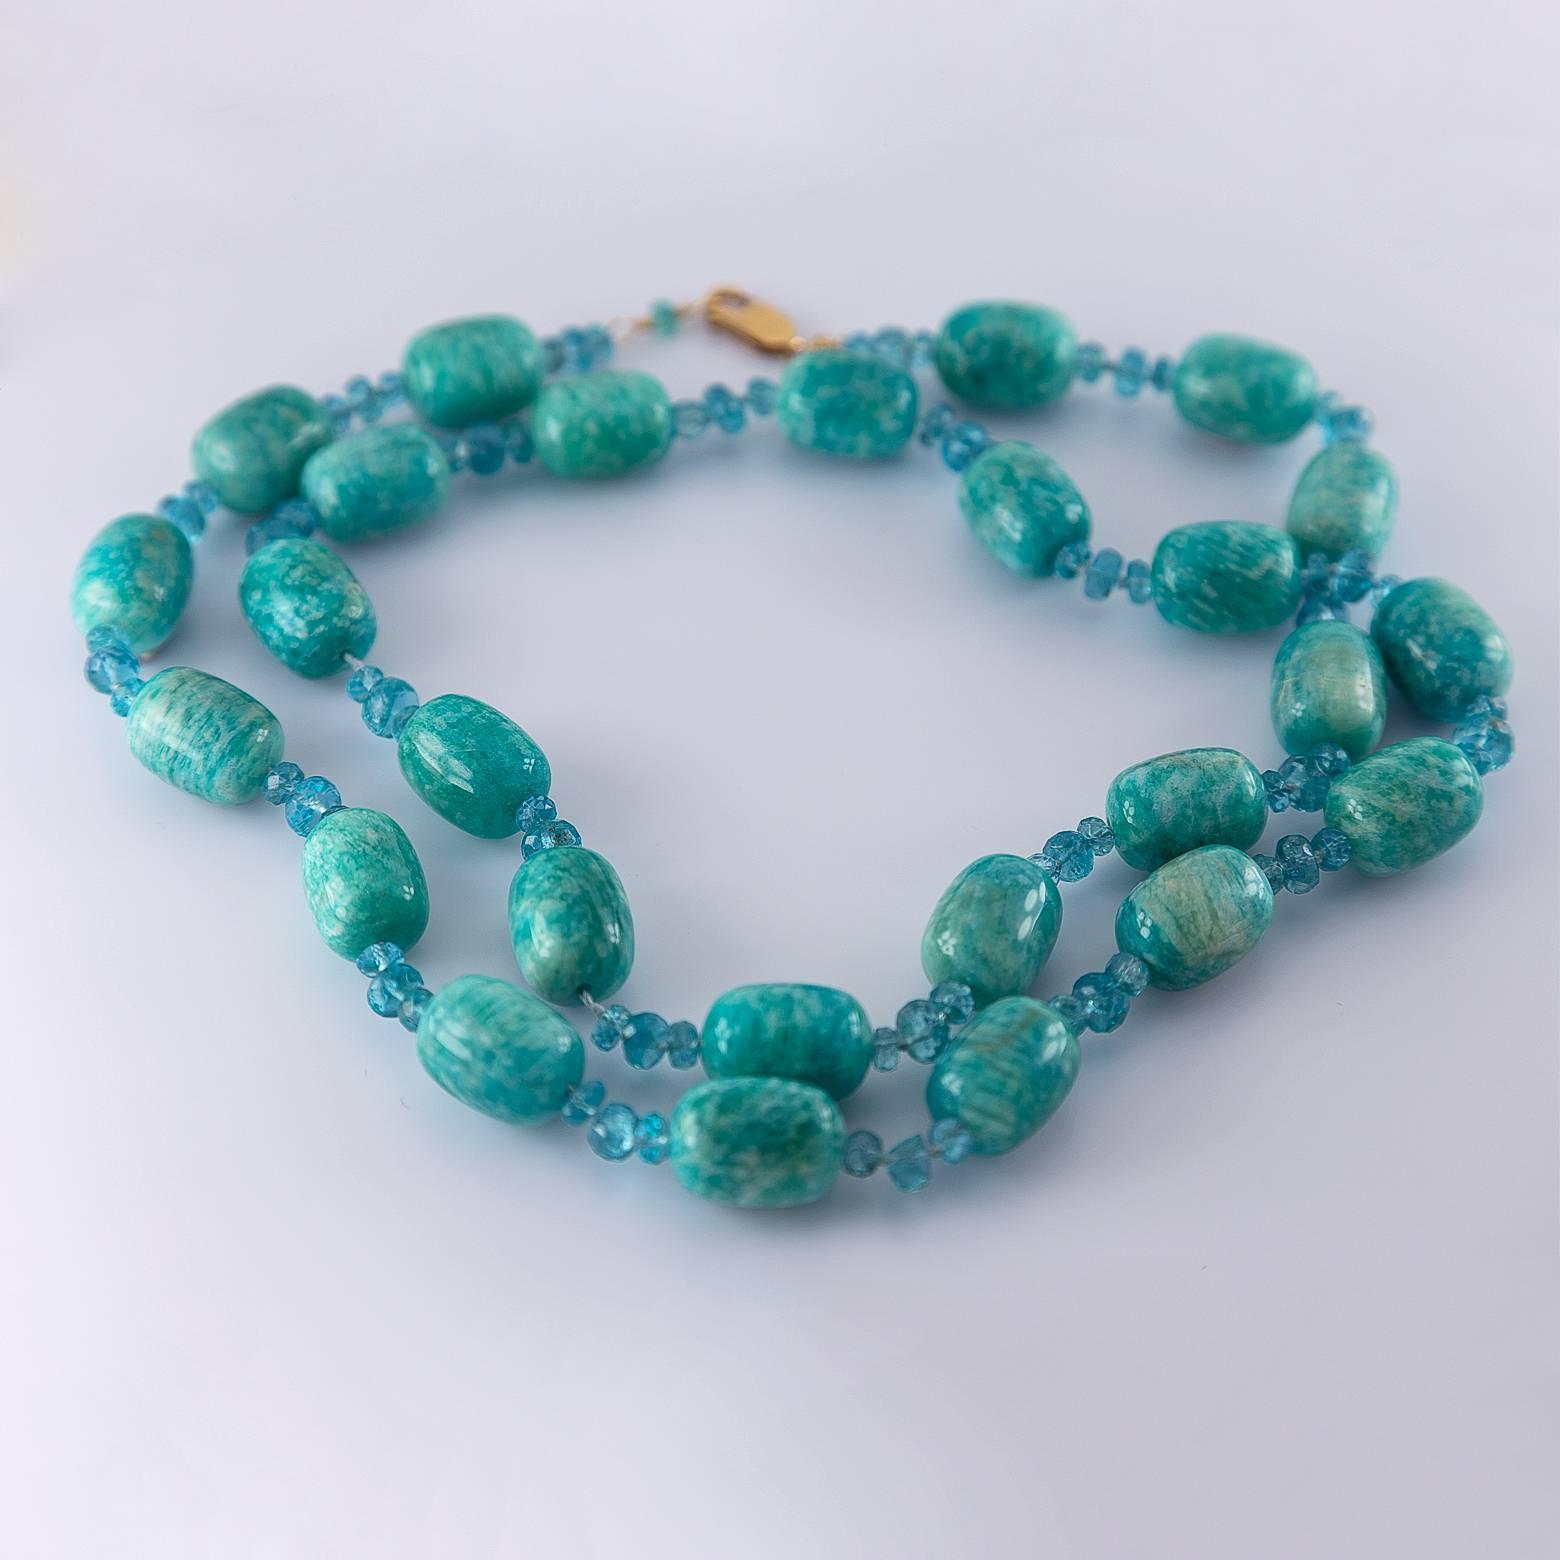 This amazonite and apatite necklace is hand-made by our jewelers in our workshop in our San Francisco Bay Area location. The pieces are large and have a substantial weight to them. The blues and greens are bright, cheerful, and beautiful with a